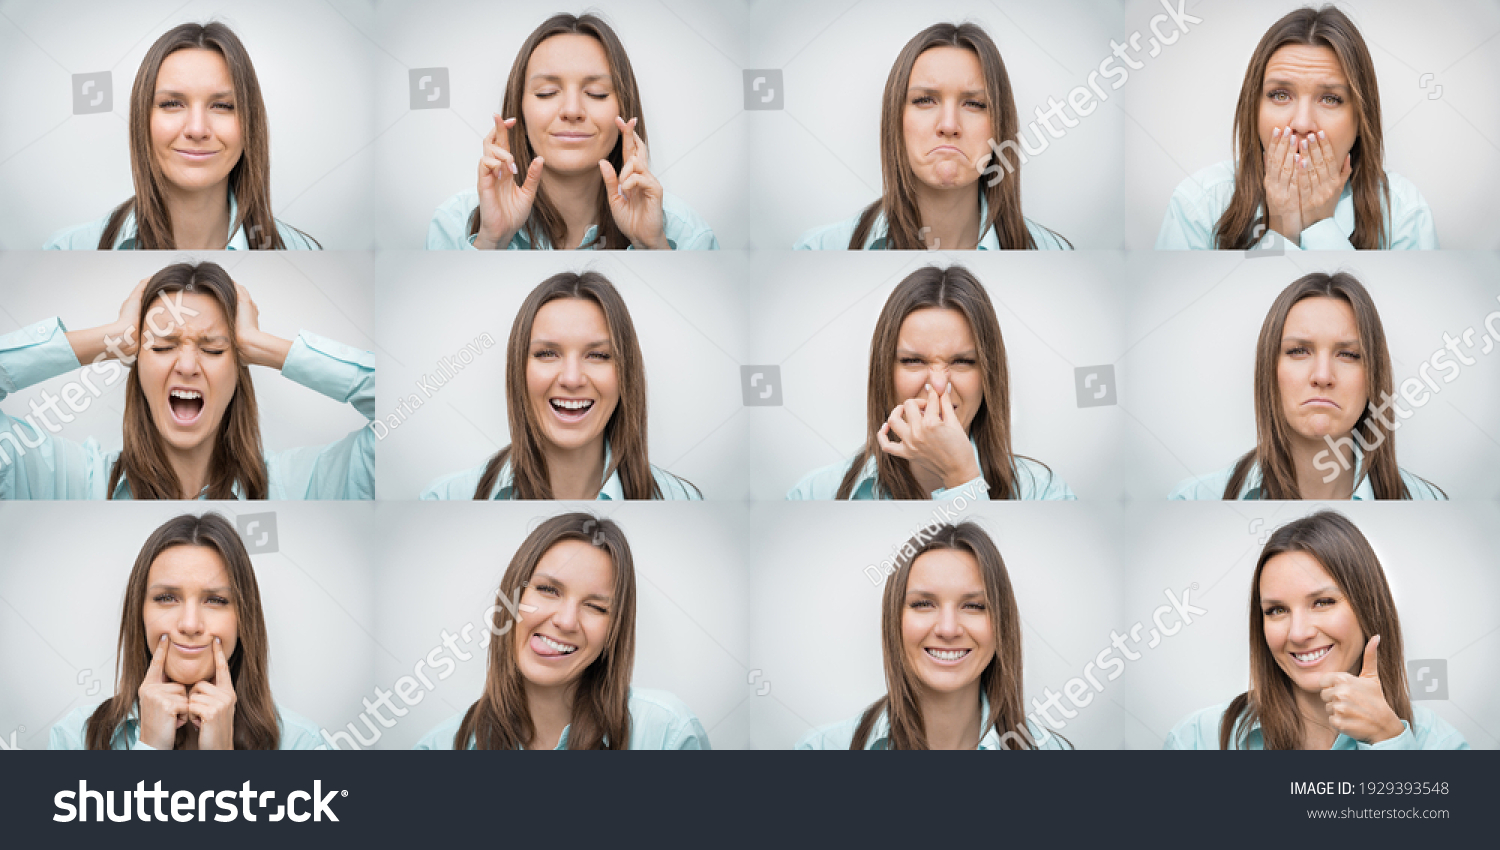 Set of beautiful woman showing several different facial emotions or expressions and gestures isolated on gray background. Collage of human emotions #1929393548